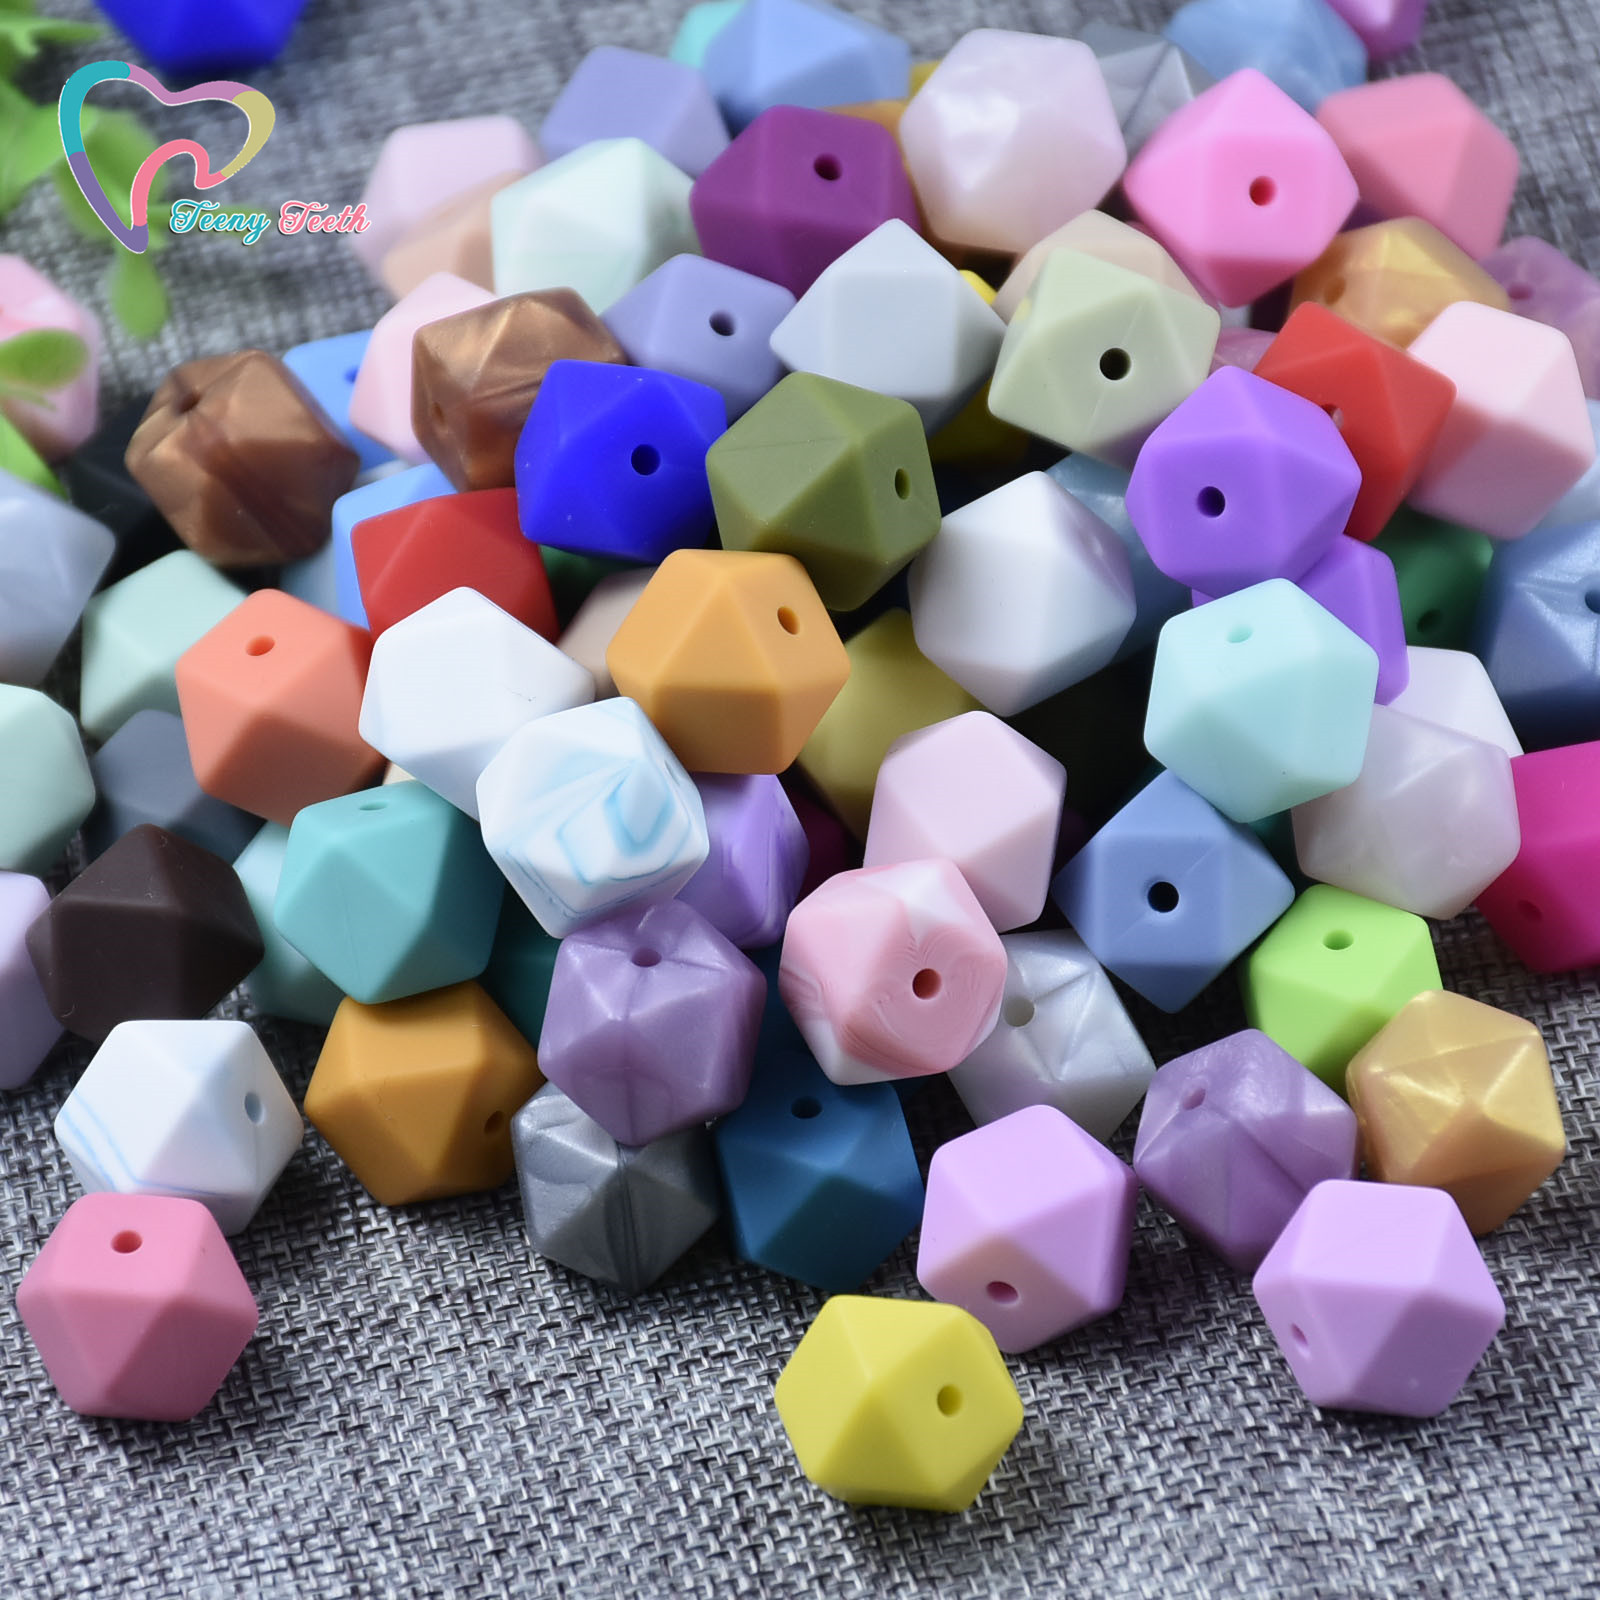 100pcs Mini Hexagon Food Grade Silicone Bead 14mm Baby Teether Baby Teething Toy BPA Free Nursing Necklace Pacifier Pendant